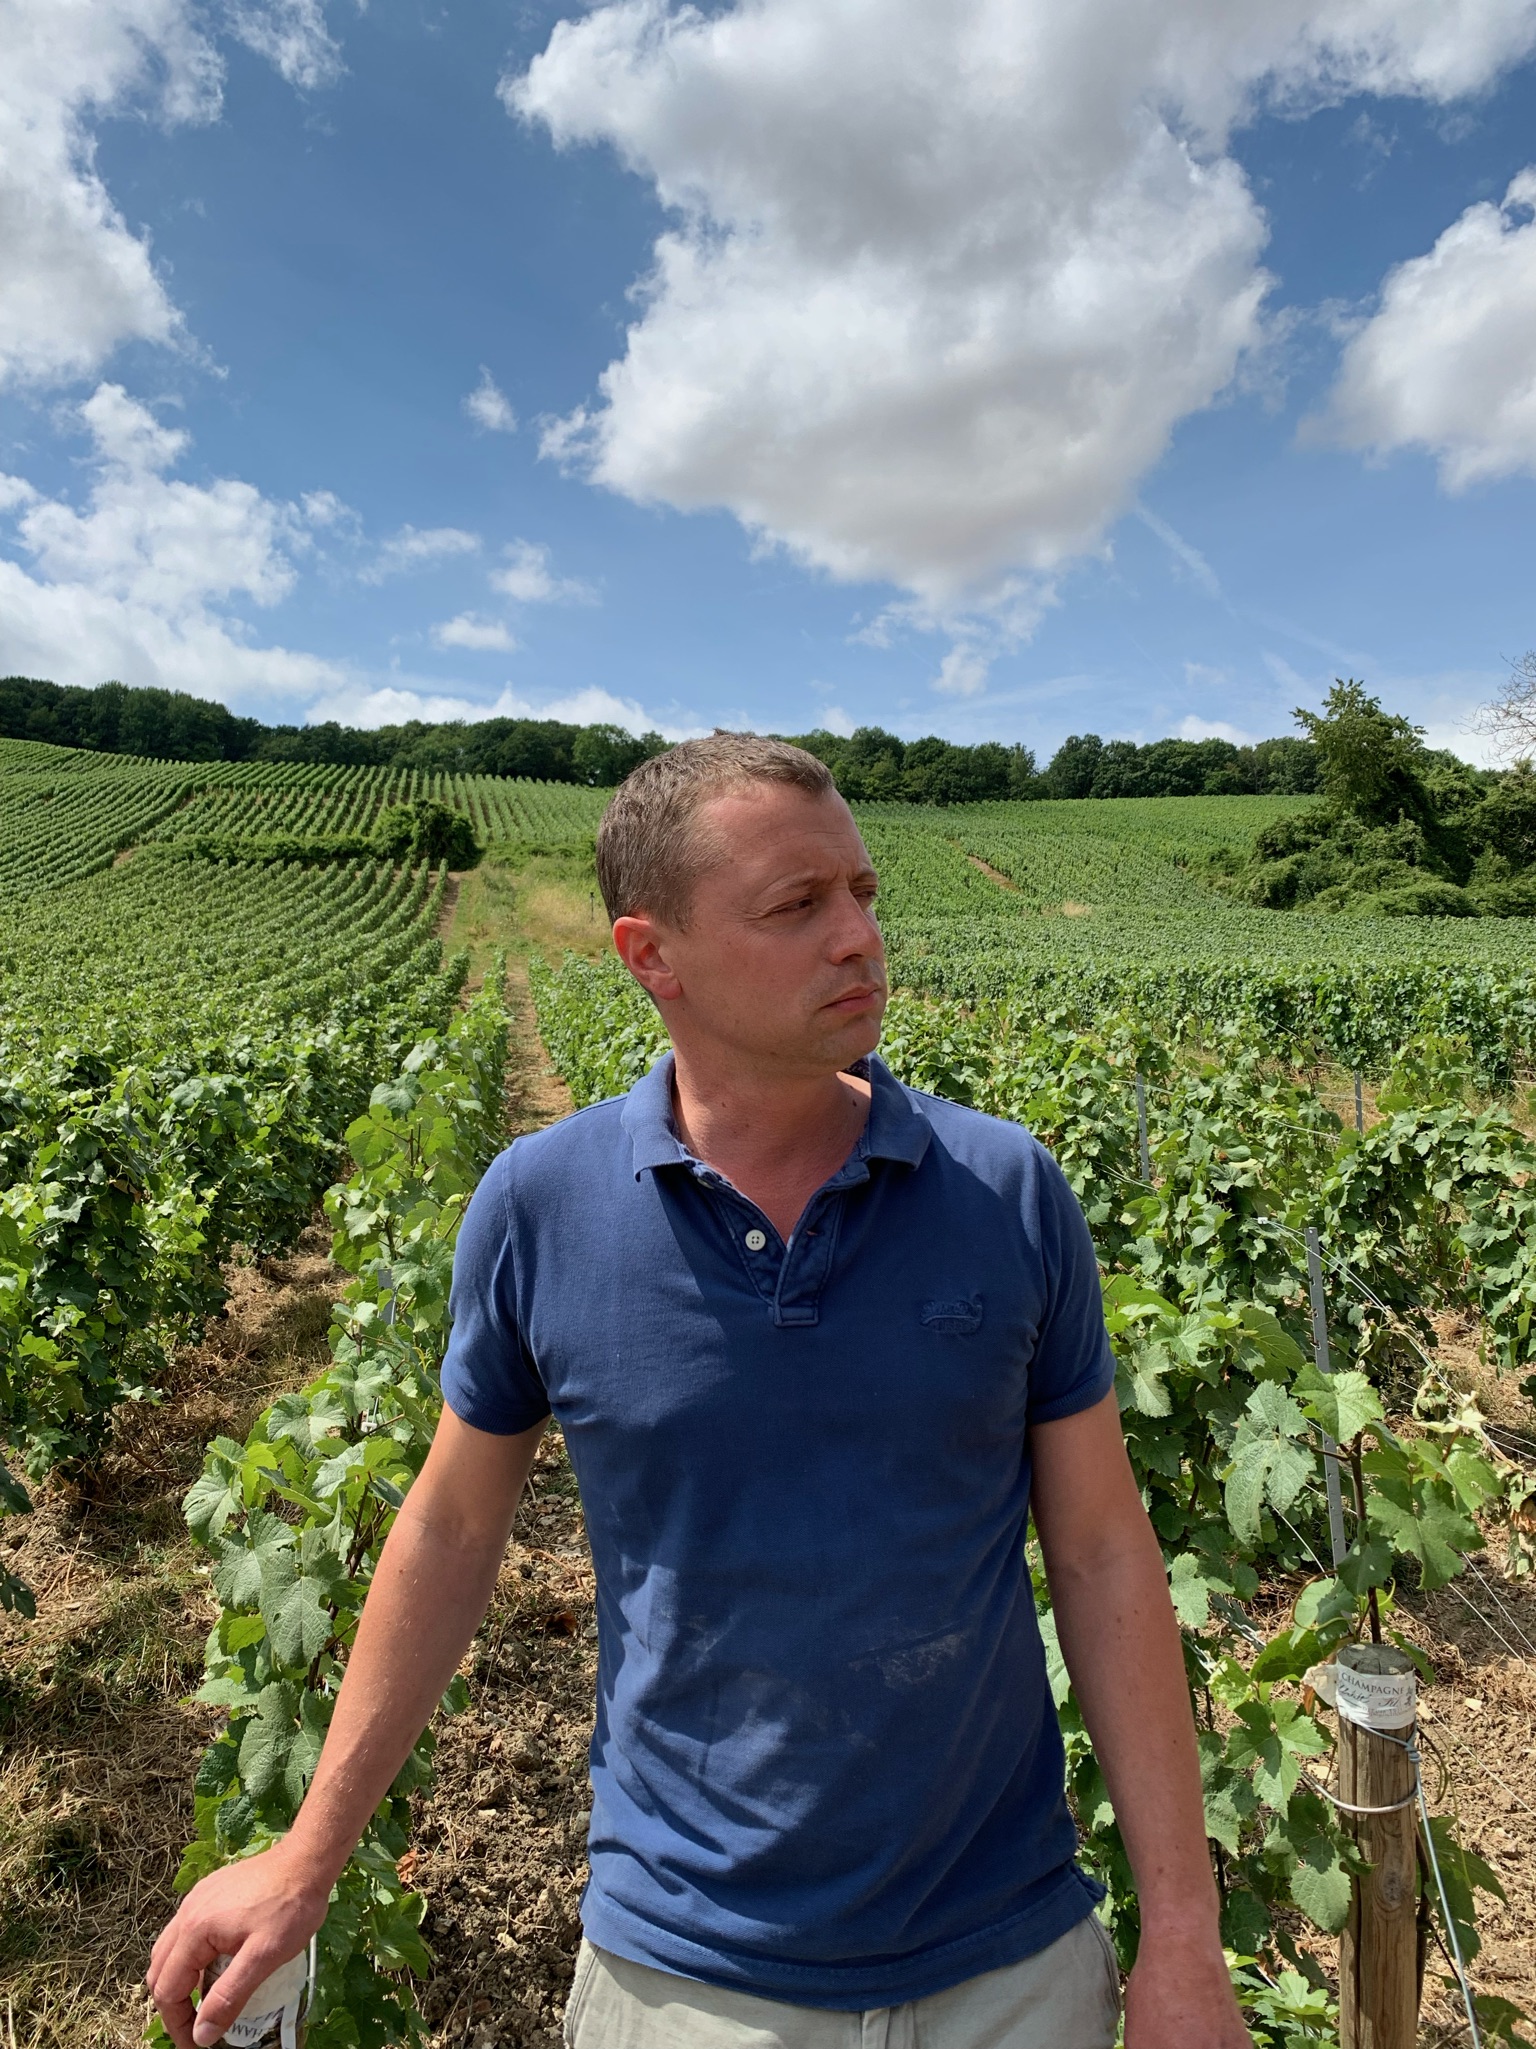 Producer and Place: Champagne Today - Skurnik Wines & Spirits